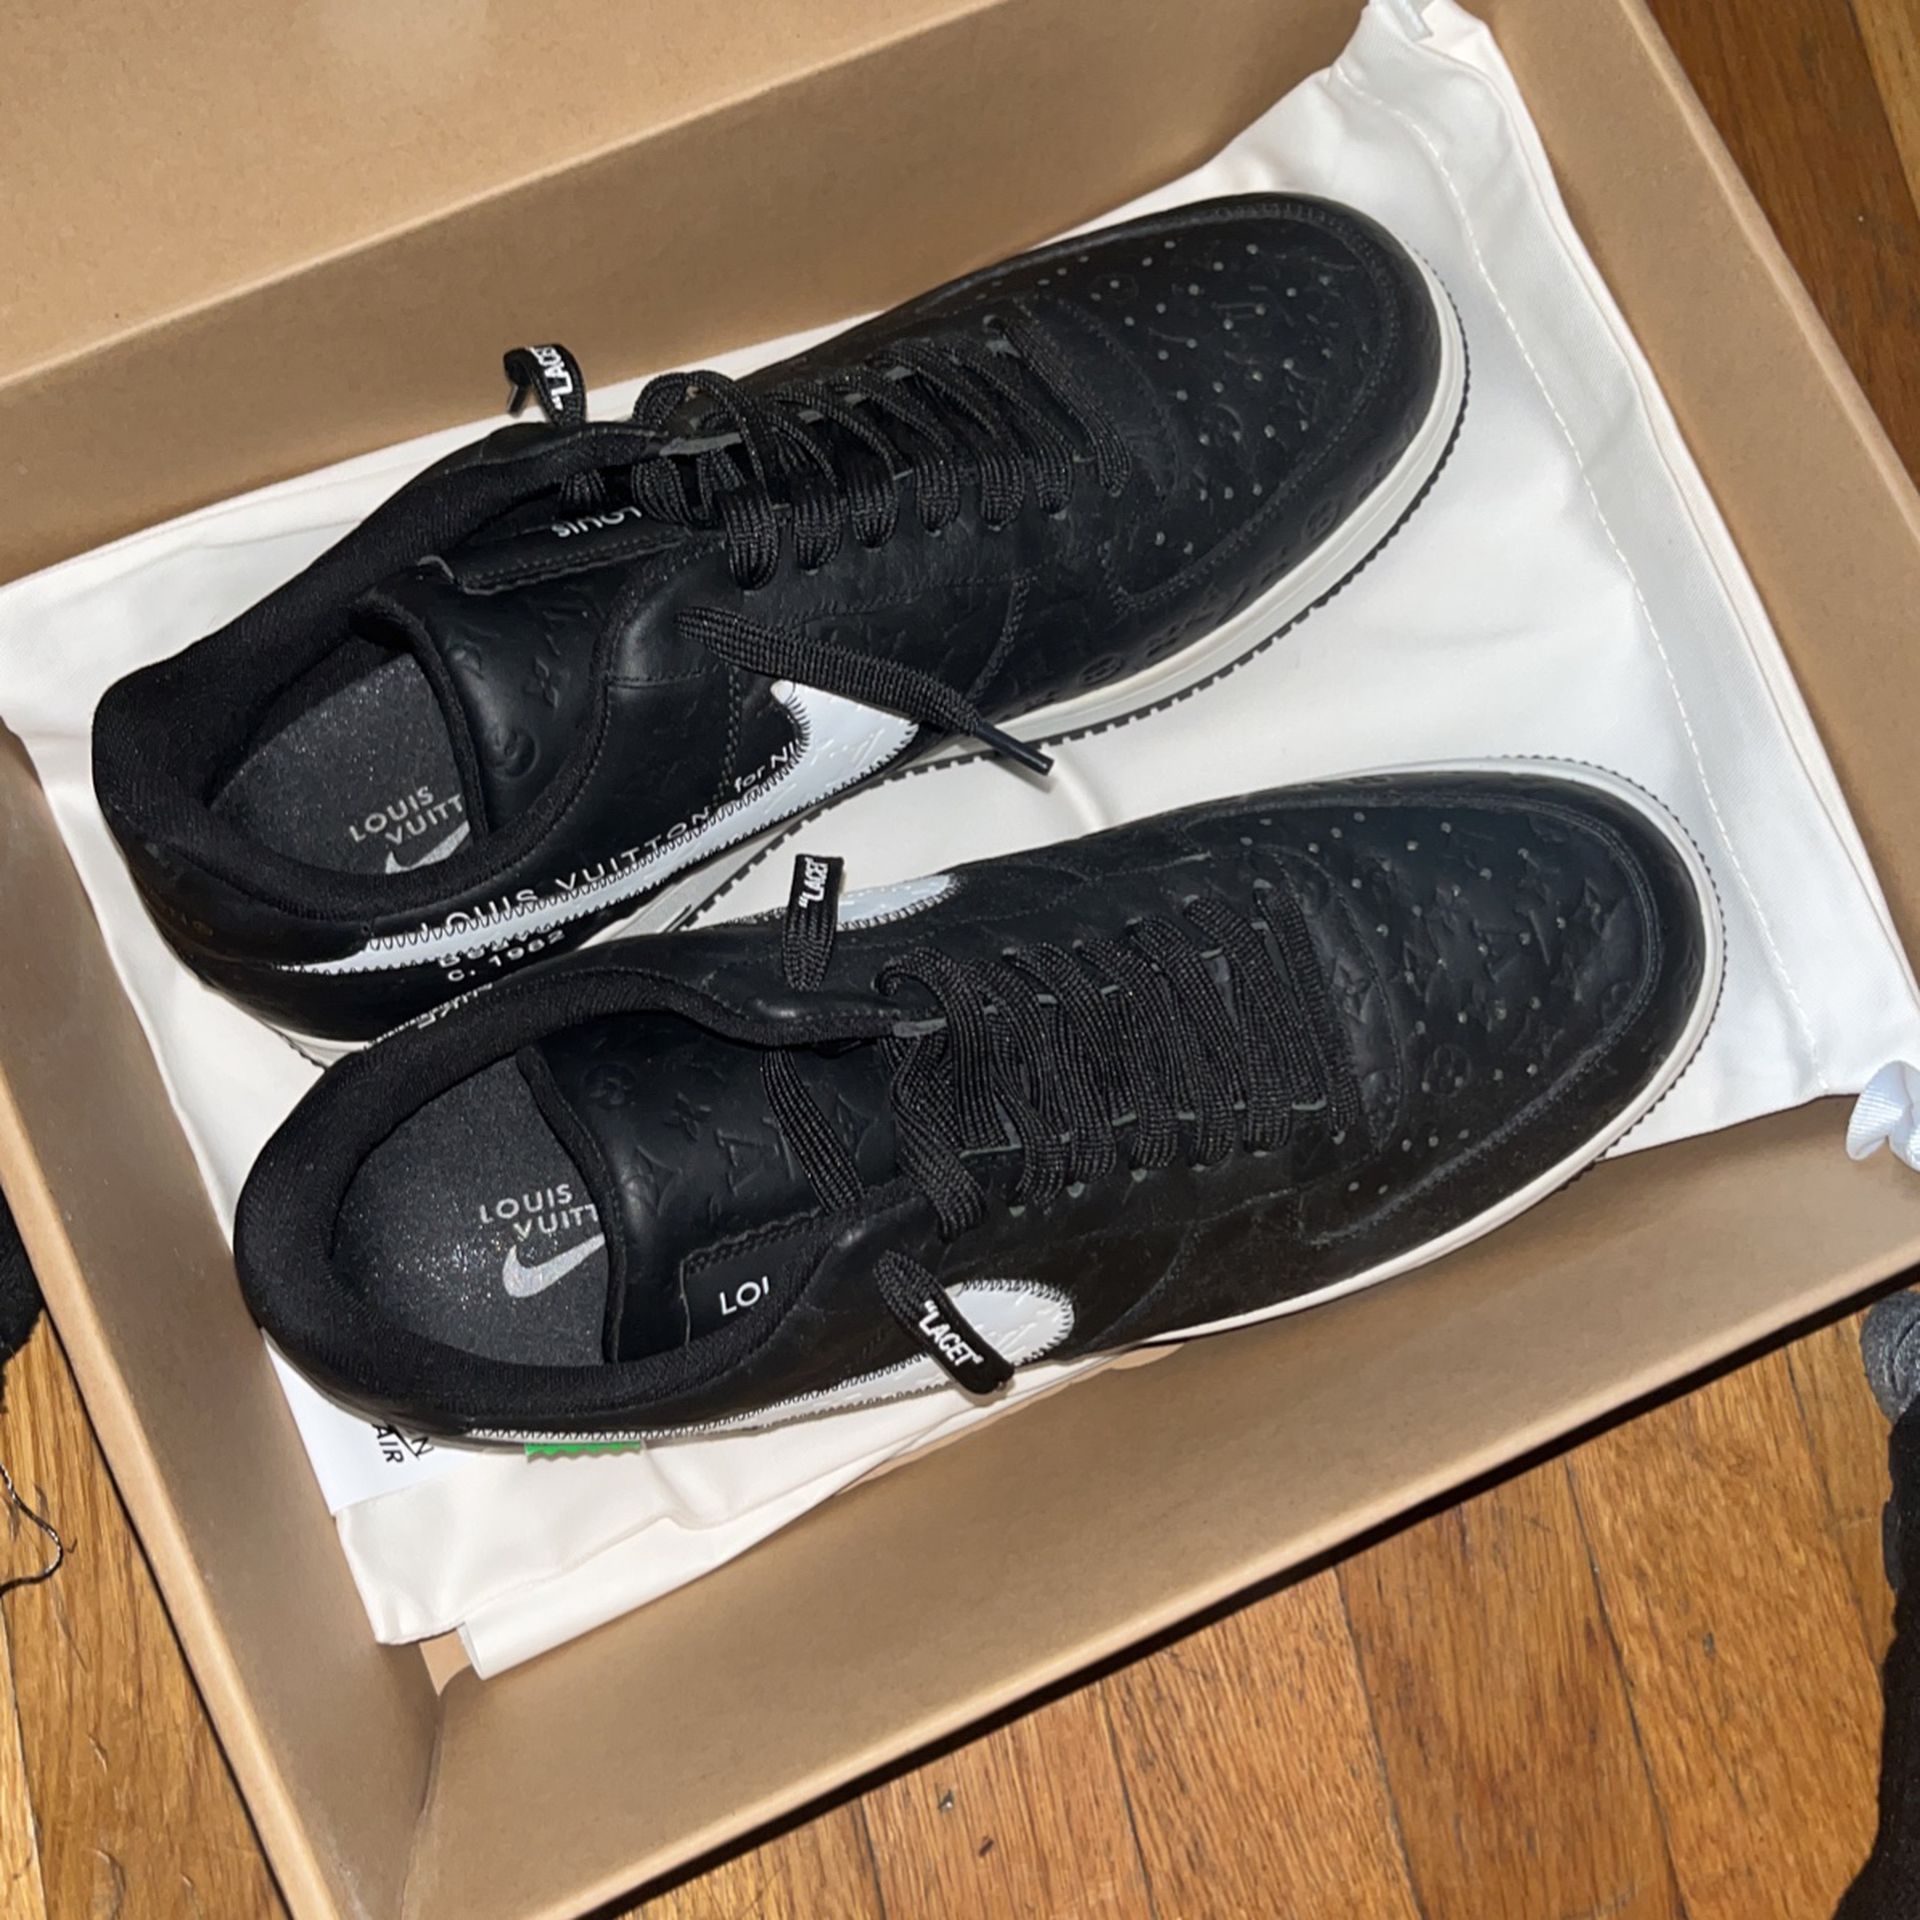 Louis Vuitton x Nike Air Force 1 Black  Size 8.5 for Sale in New York, NY  - OfferUp